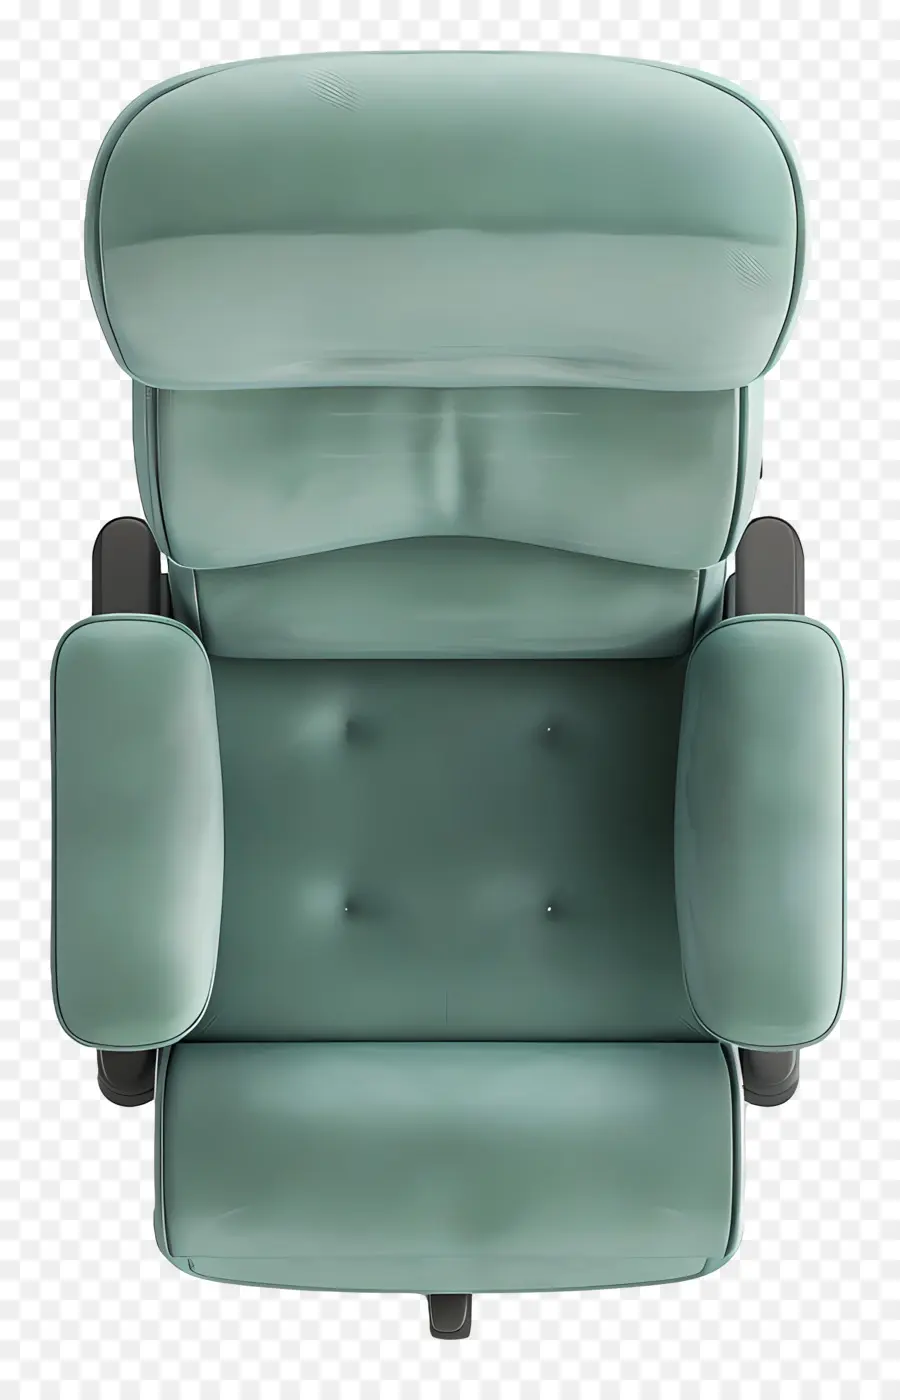 Chaise Vue De Dessus，Chaise Inclinable Verte PNG